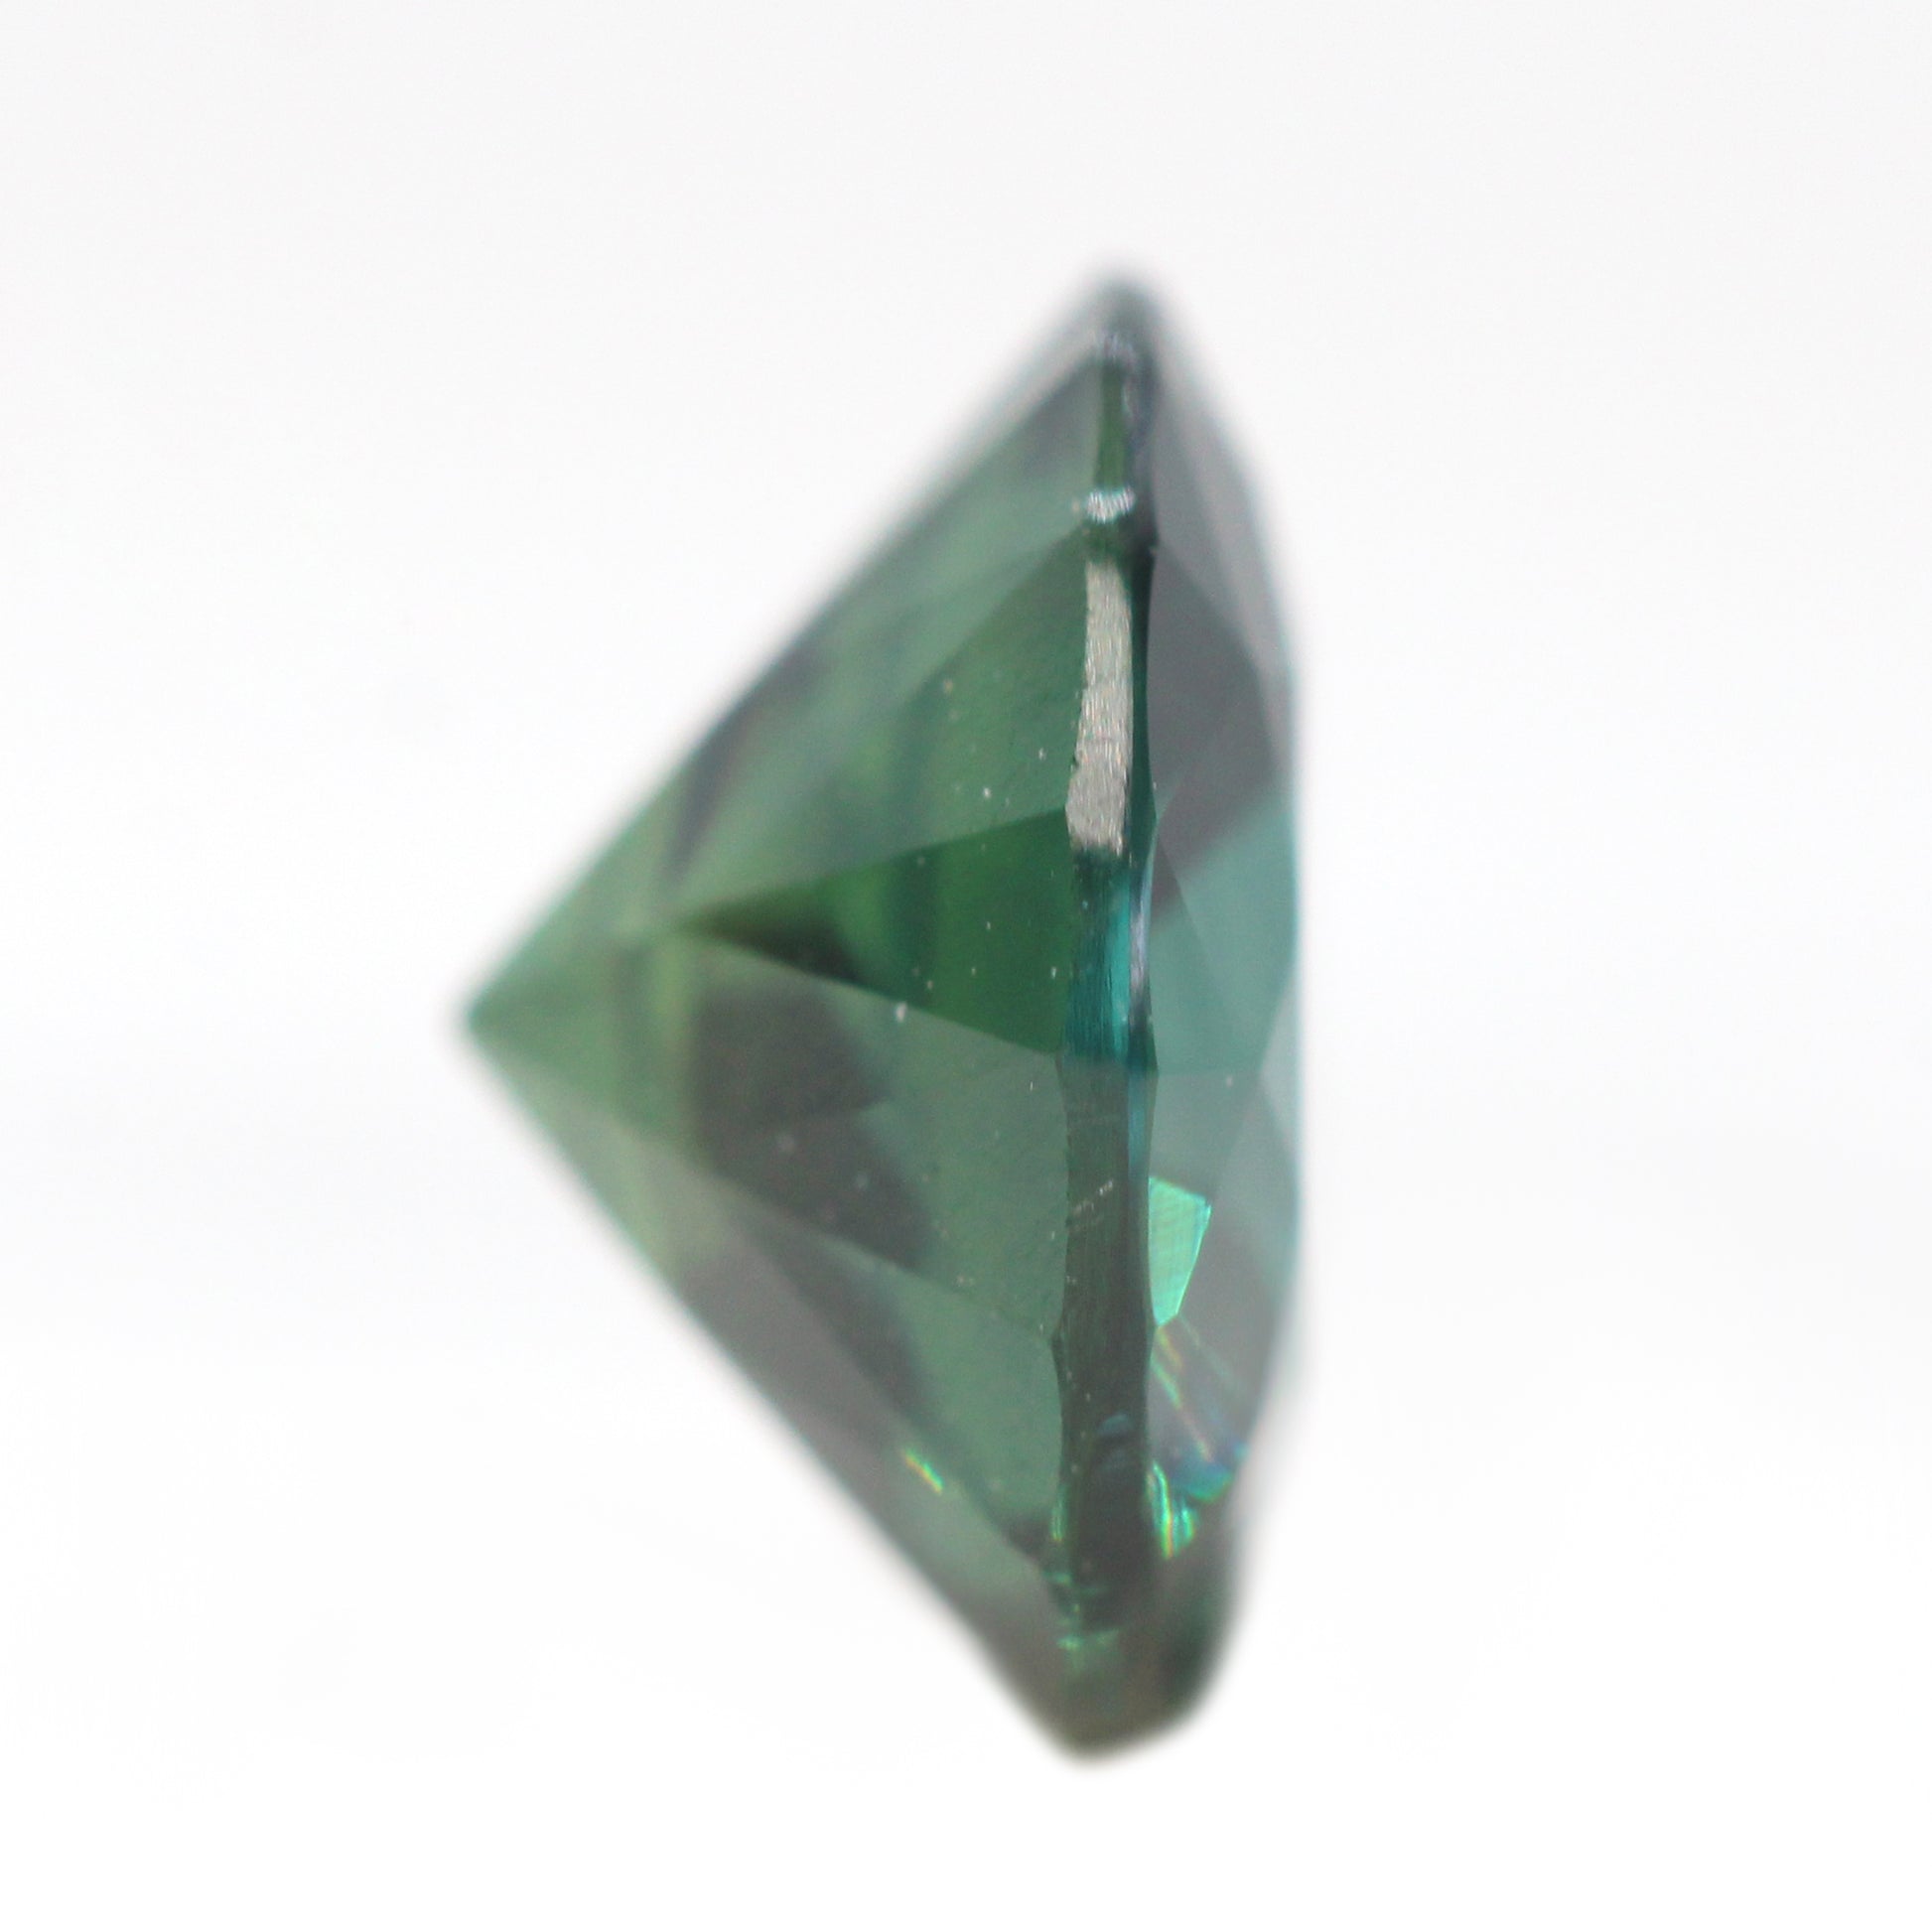 1.81 Carat Round Dark Teal Green Sapphire for Custom Work - Inventory Code TGRS181 - Midwinter Co. Alternative Bridal Rings and Modern Fine Jewelry